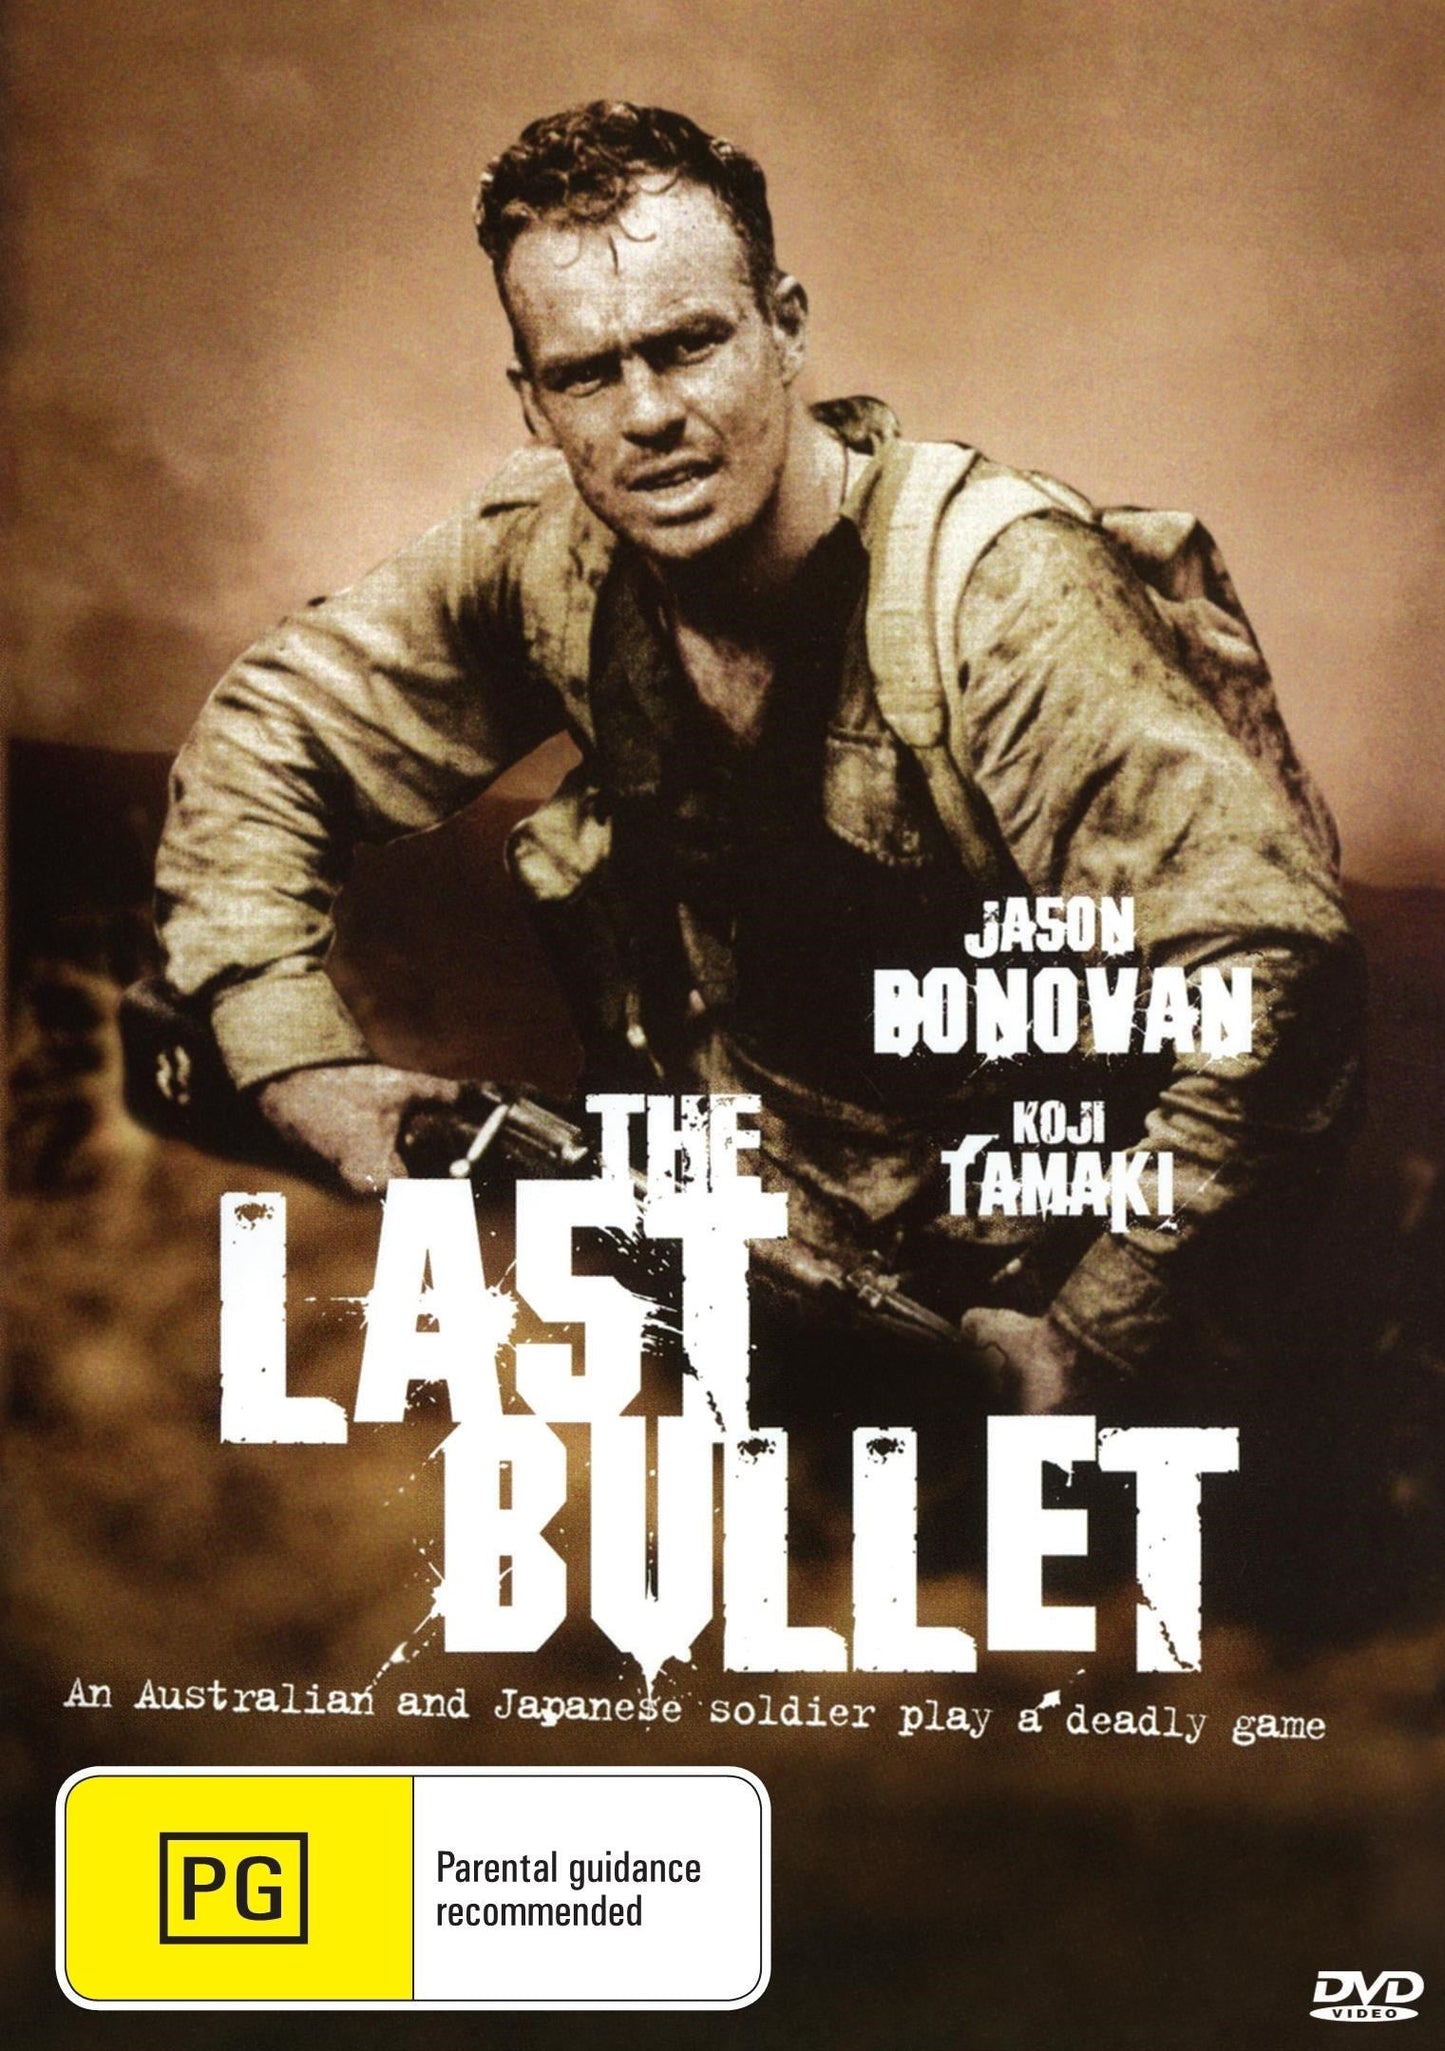 The Last Bullet rareandcollectibledvds